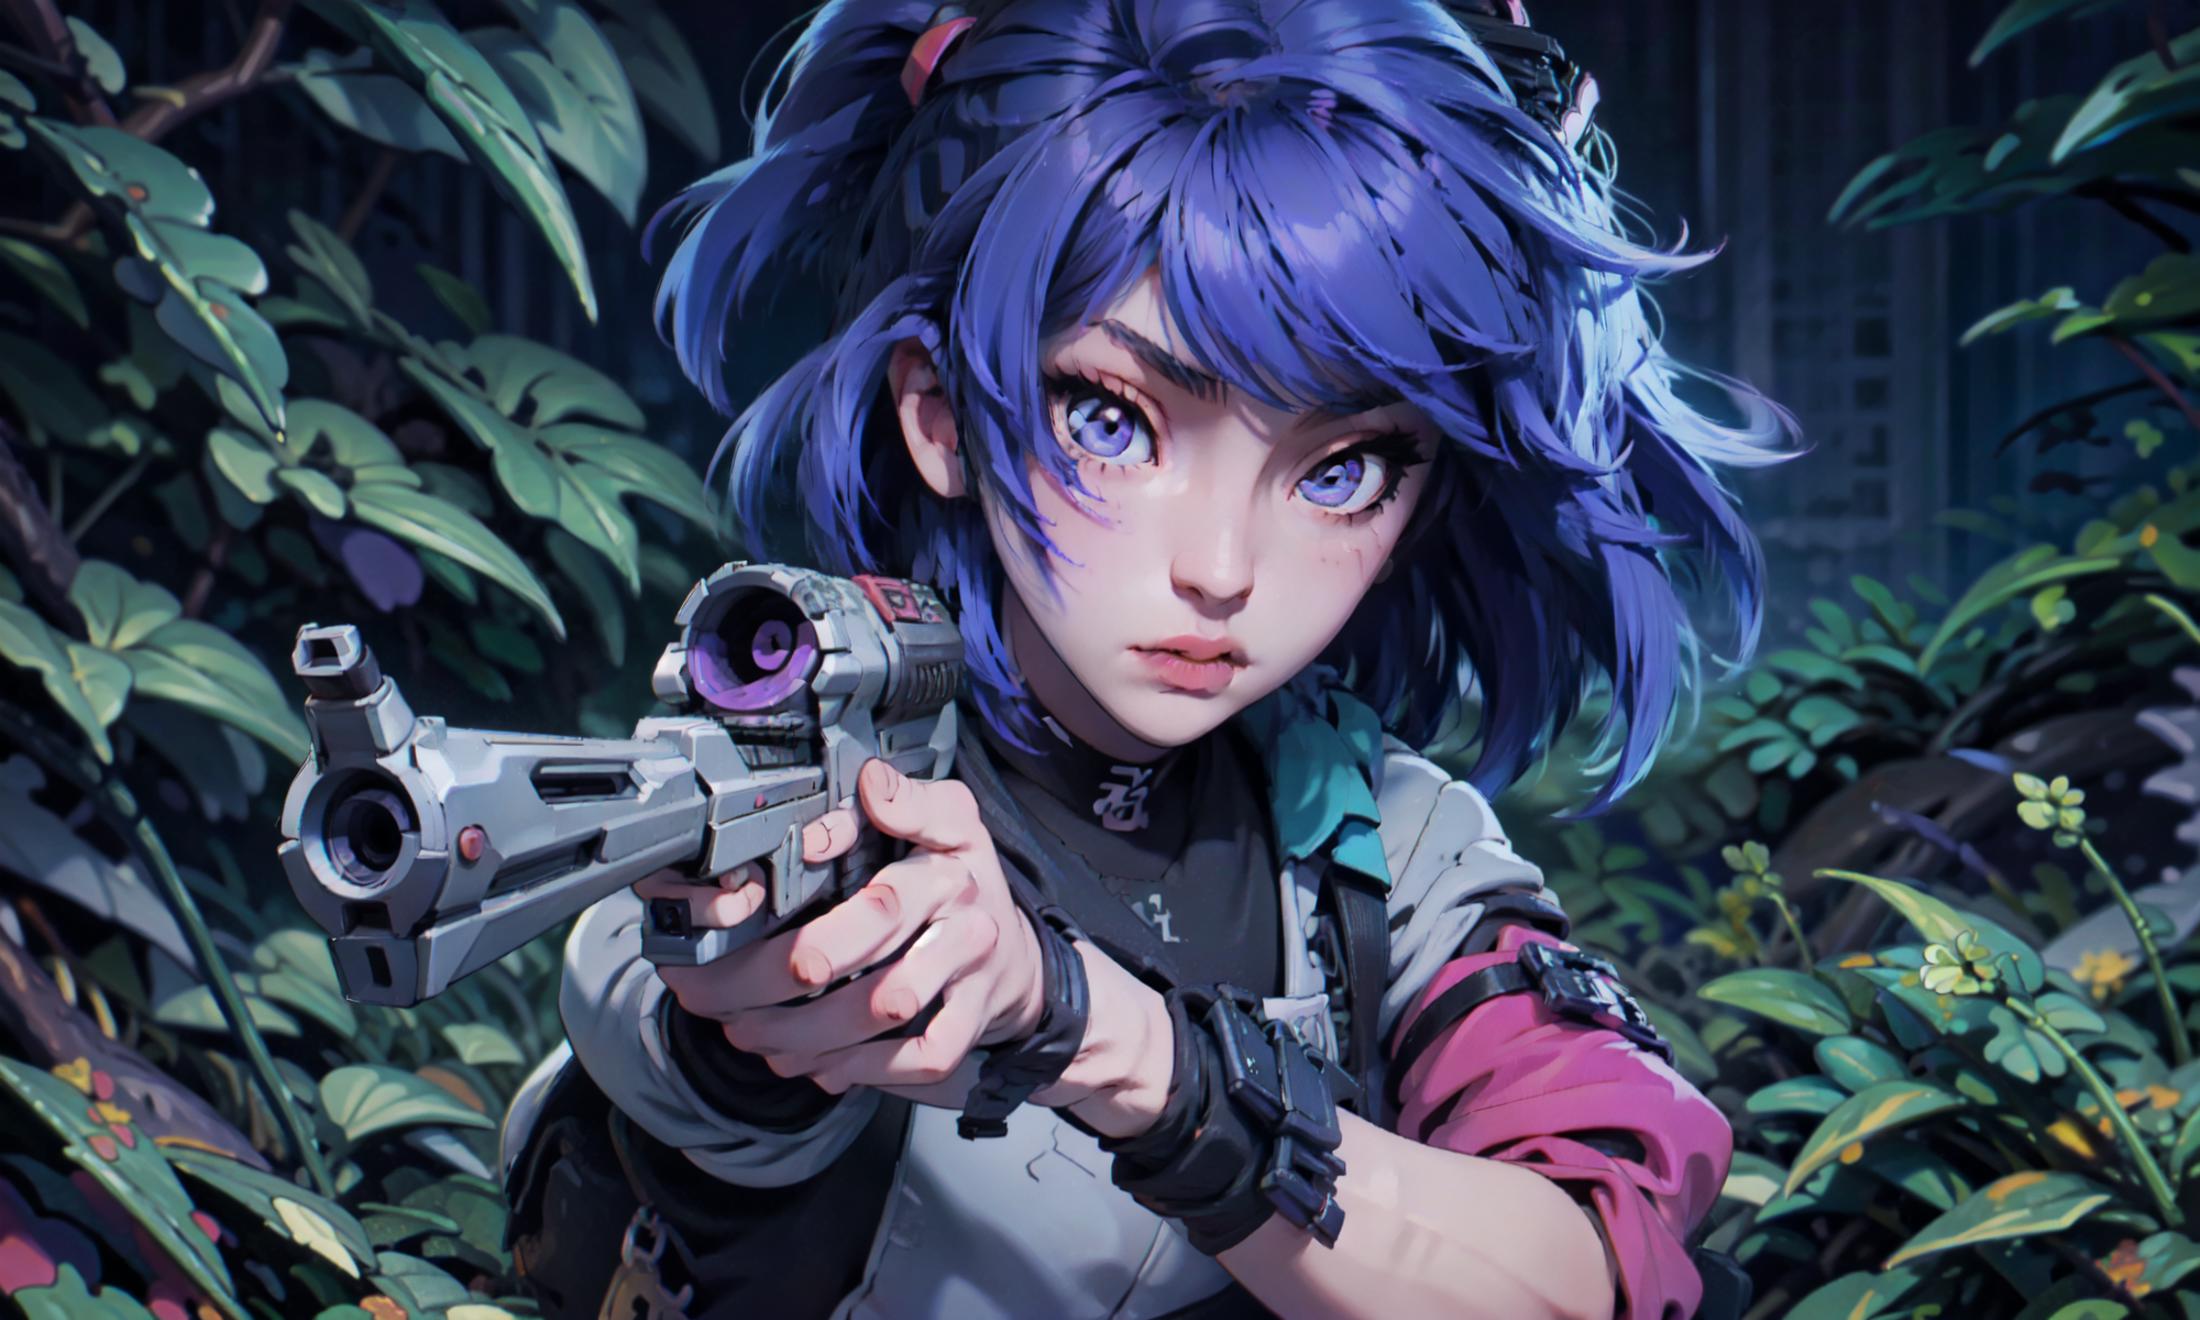 Blue haired girl holding a gun in a jungle setting.